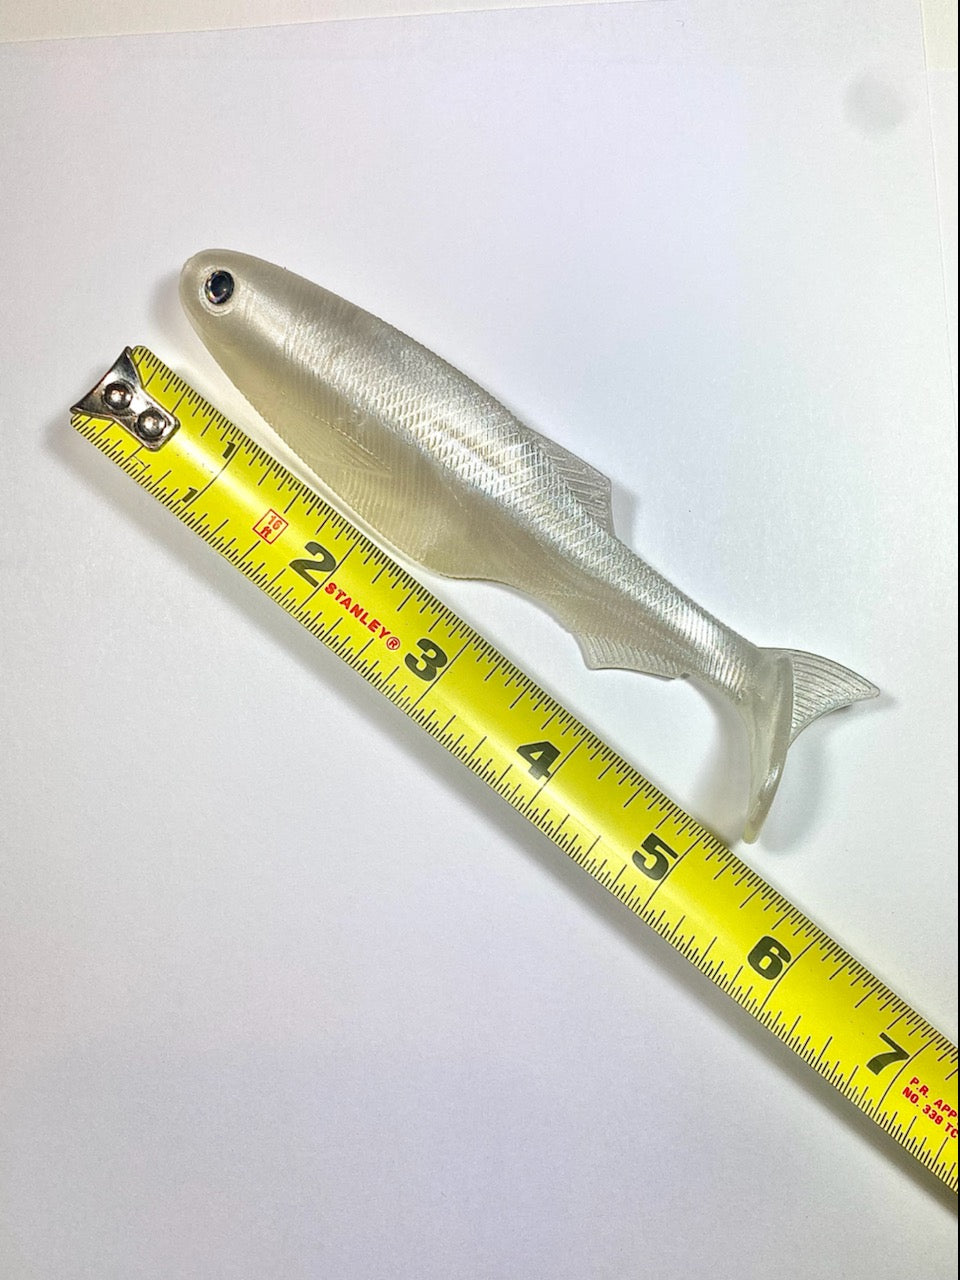 5.6 Inch Prey Bait – Tackle Command